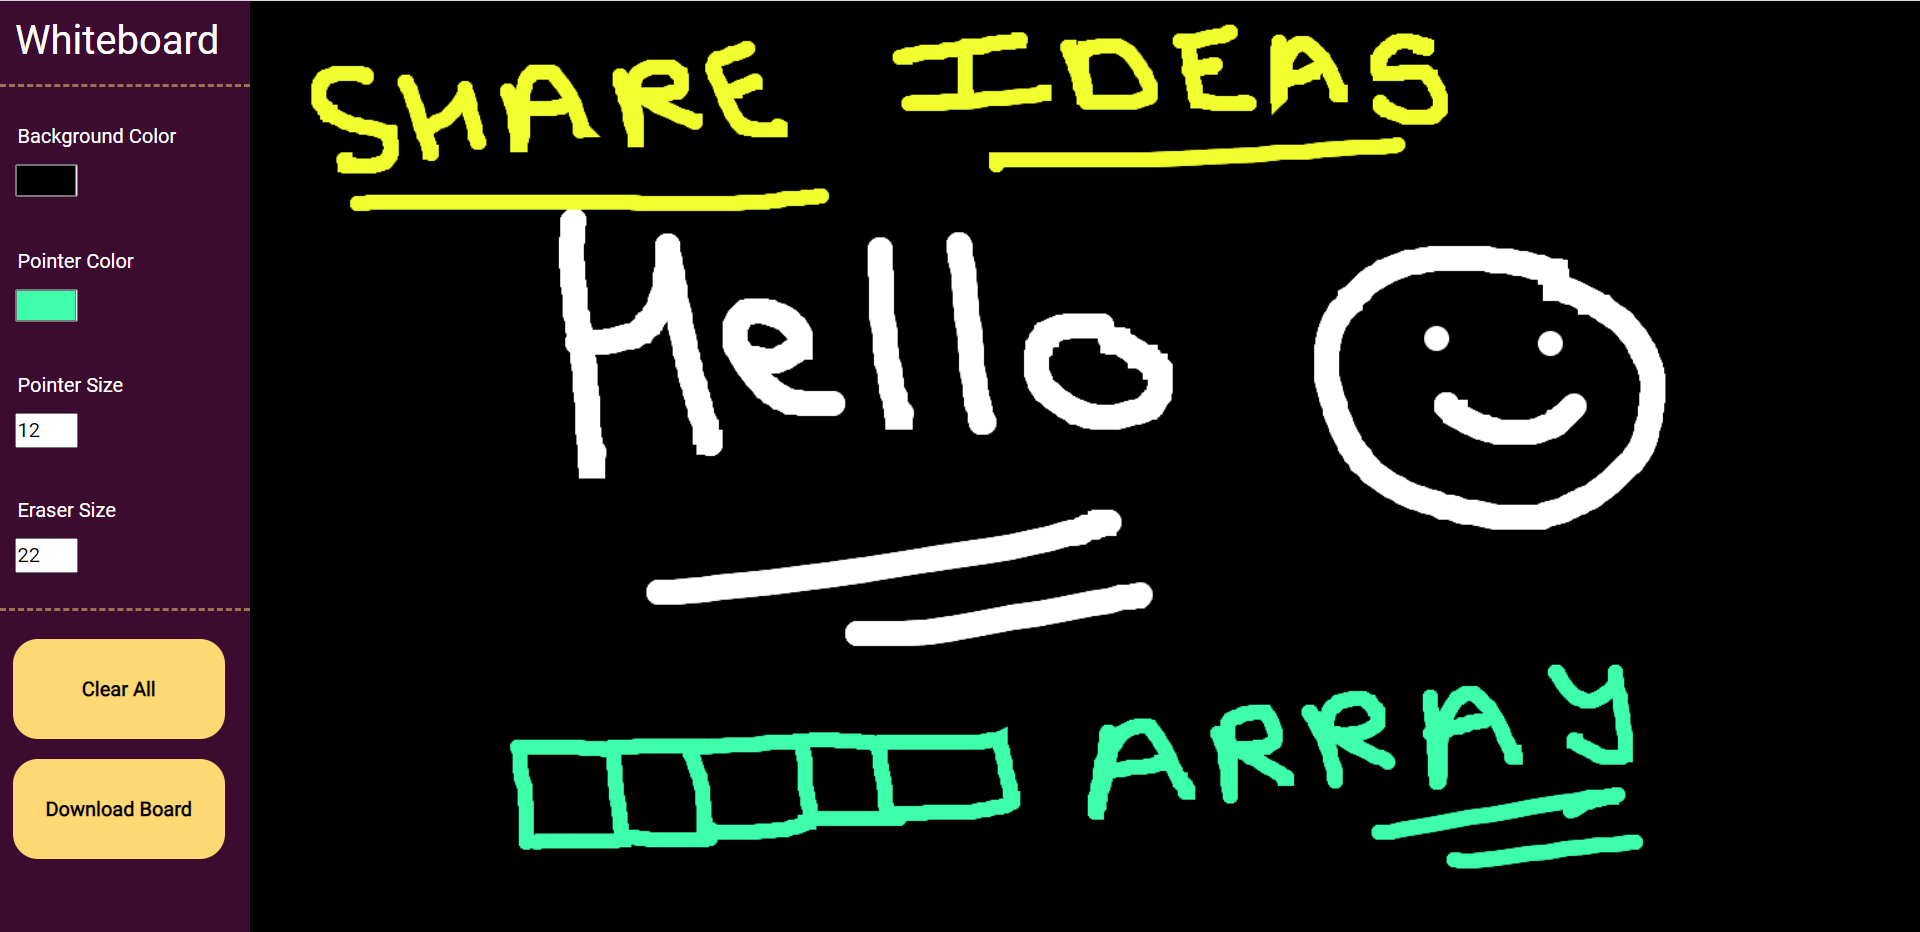 Simple Whiteboard to Brainstorm Ideas